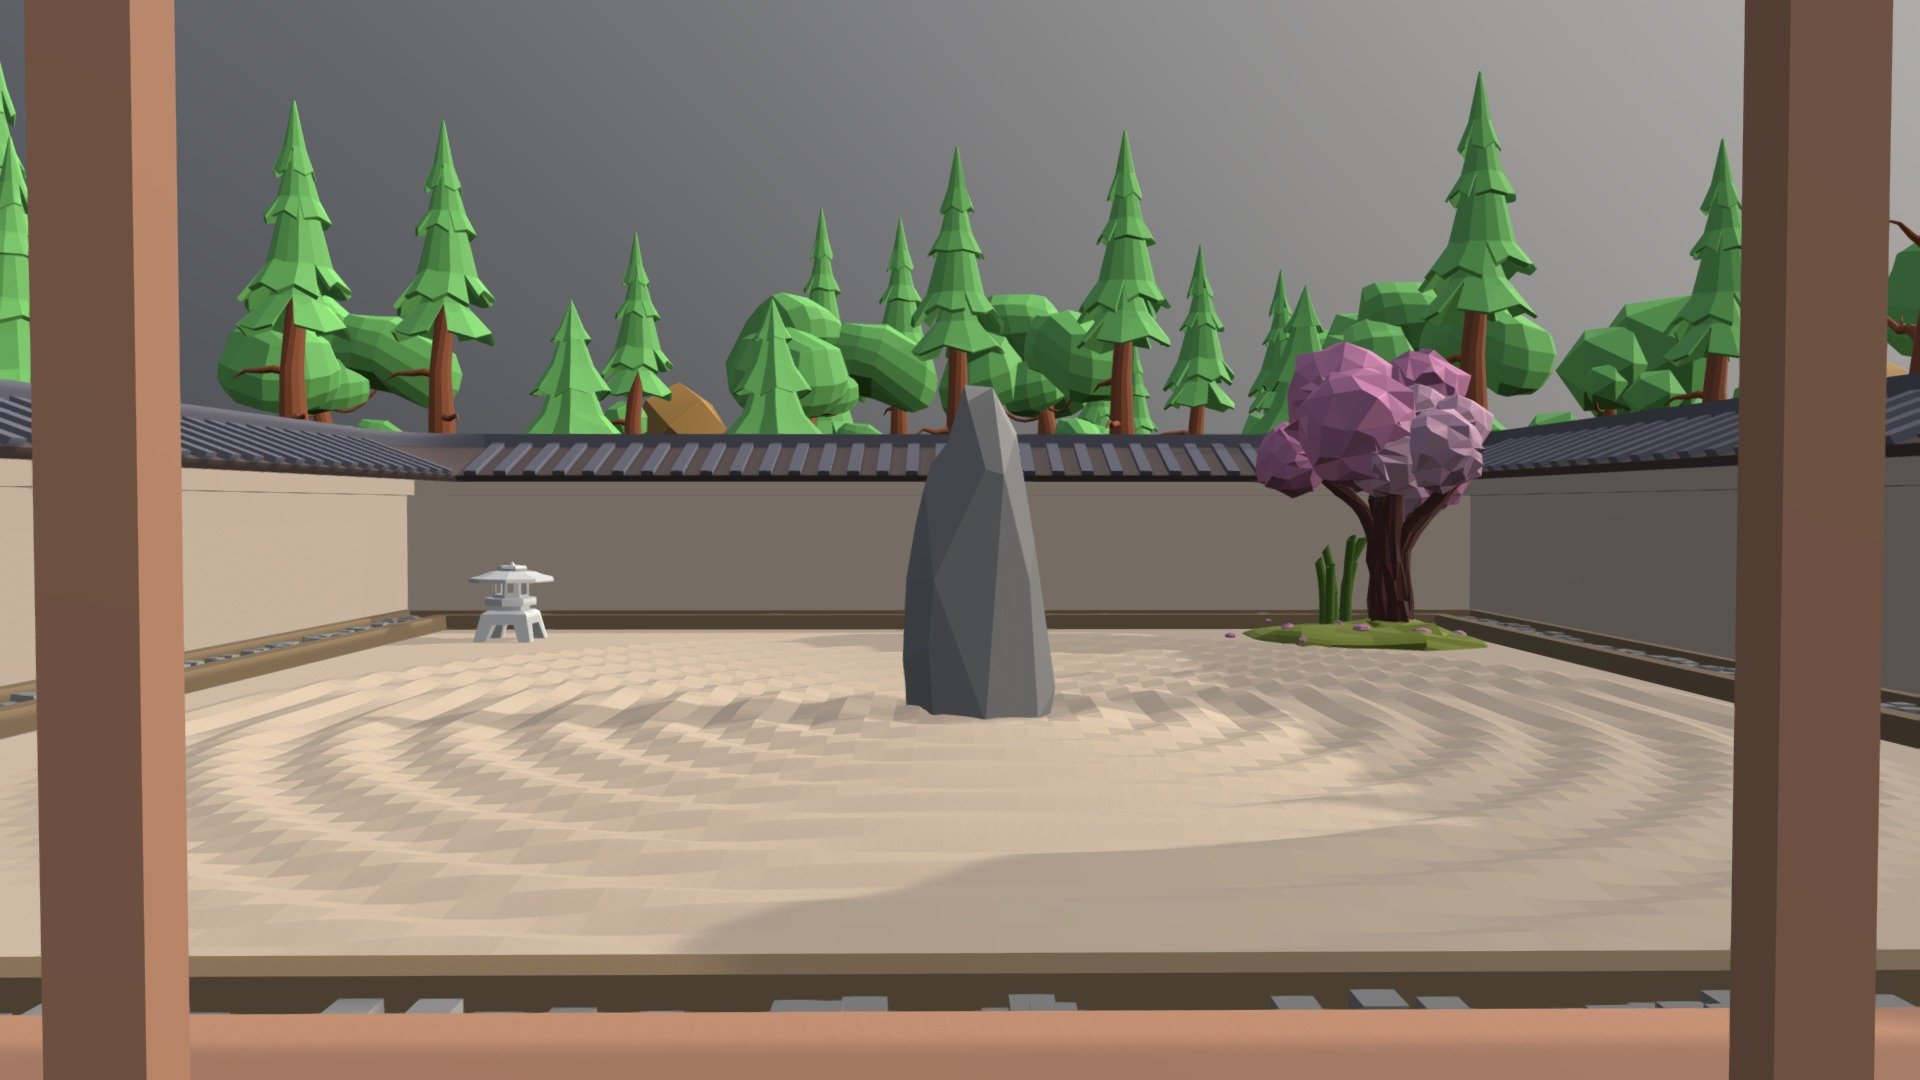 A low poly zen garden I made for a school project, ignore the &ldquo;house